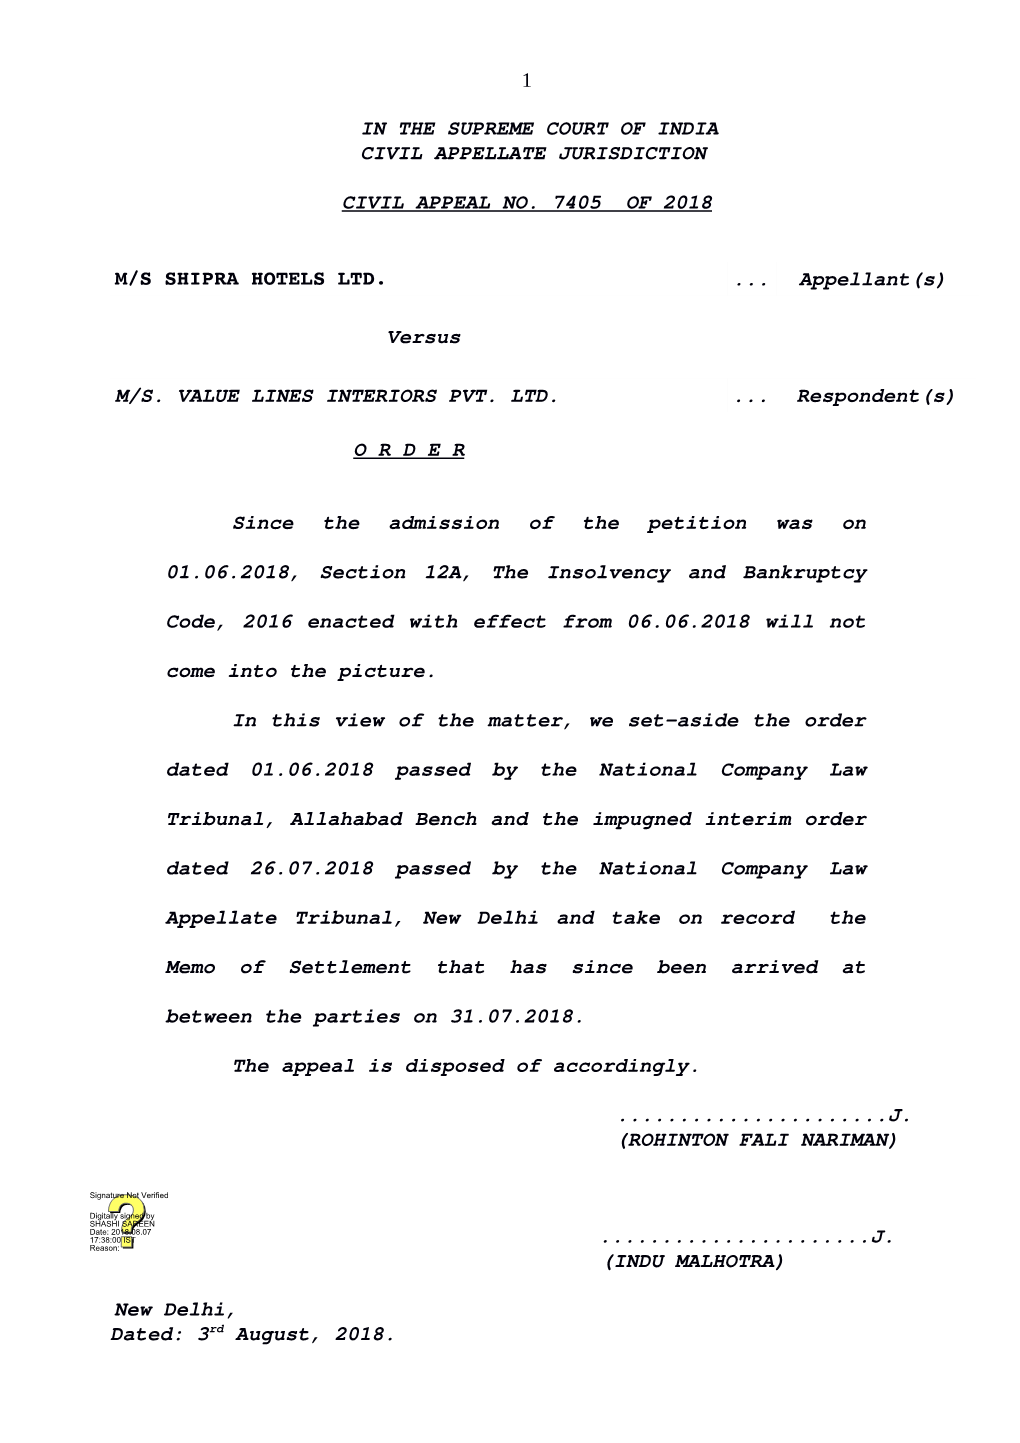 1 in the Supreme Court of India Civil Appellate